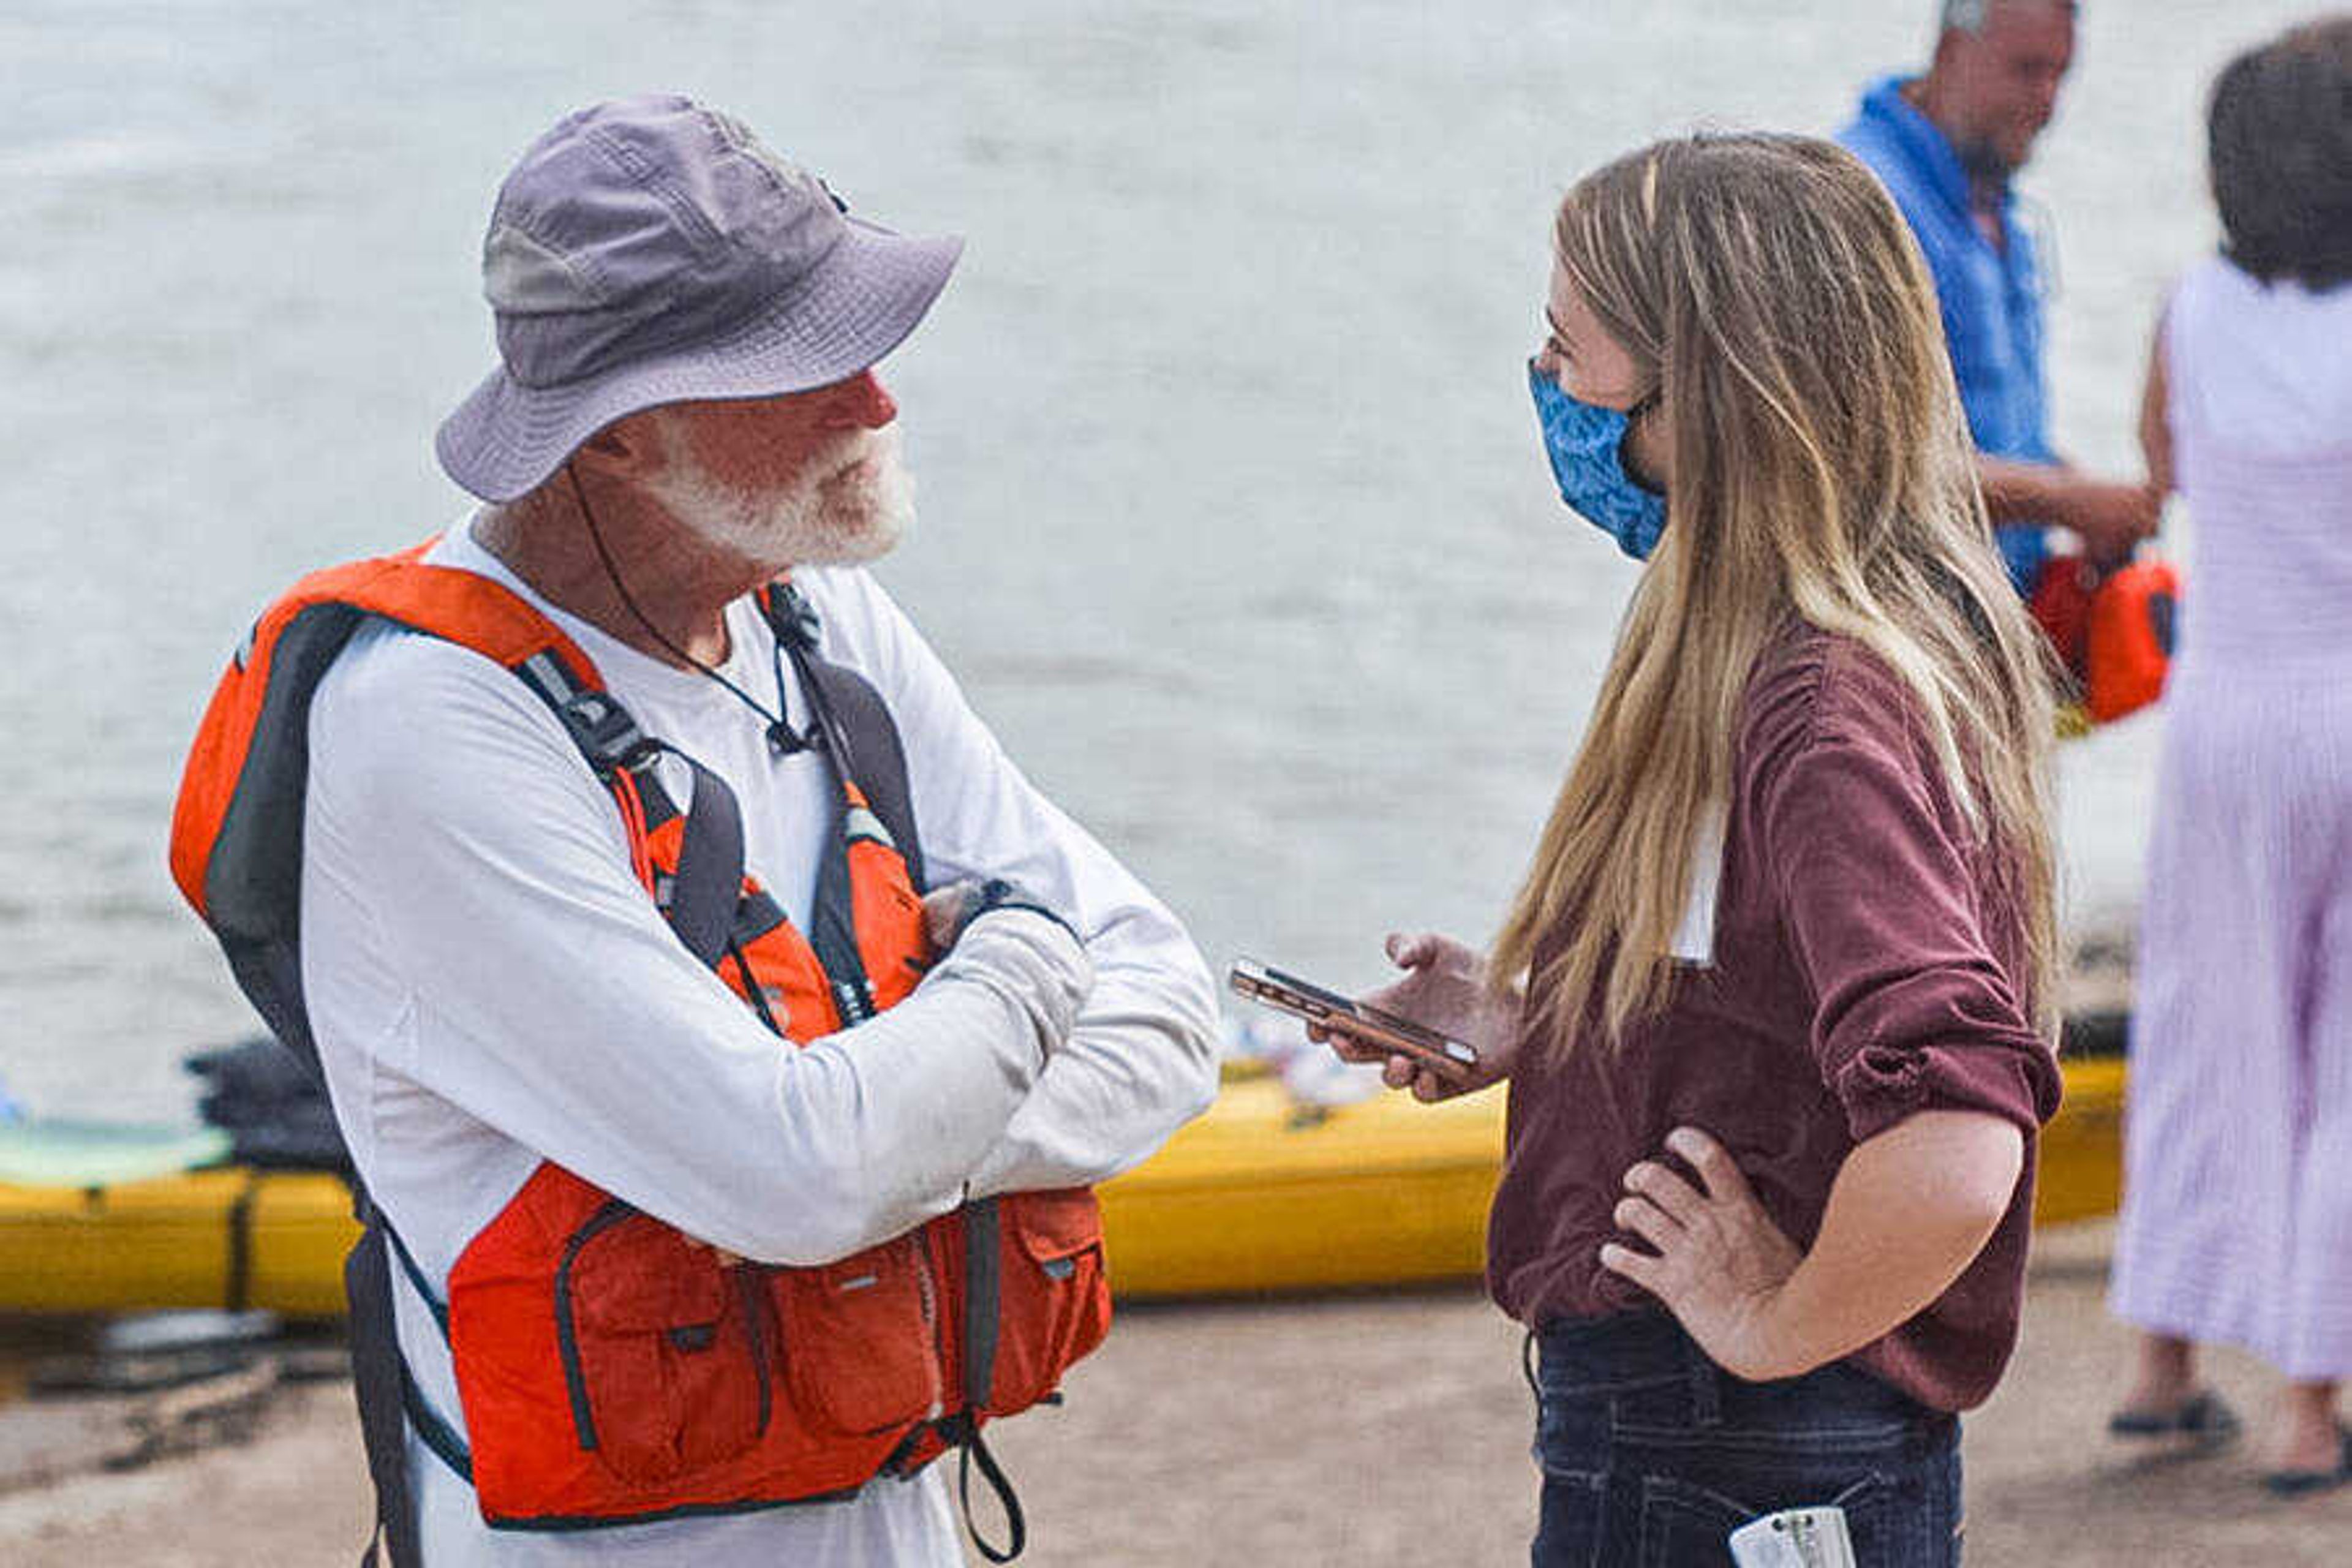 Reporter Brooke Holford interviews Stan Stark, known as "Stan the Kayaking Man." Stark is paddling 2,400 miles down the Mississippi River in a kayak; Stark is using this opportunity to raise awareness and funds for Sarge's Place, a shelter for homeless veterans.